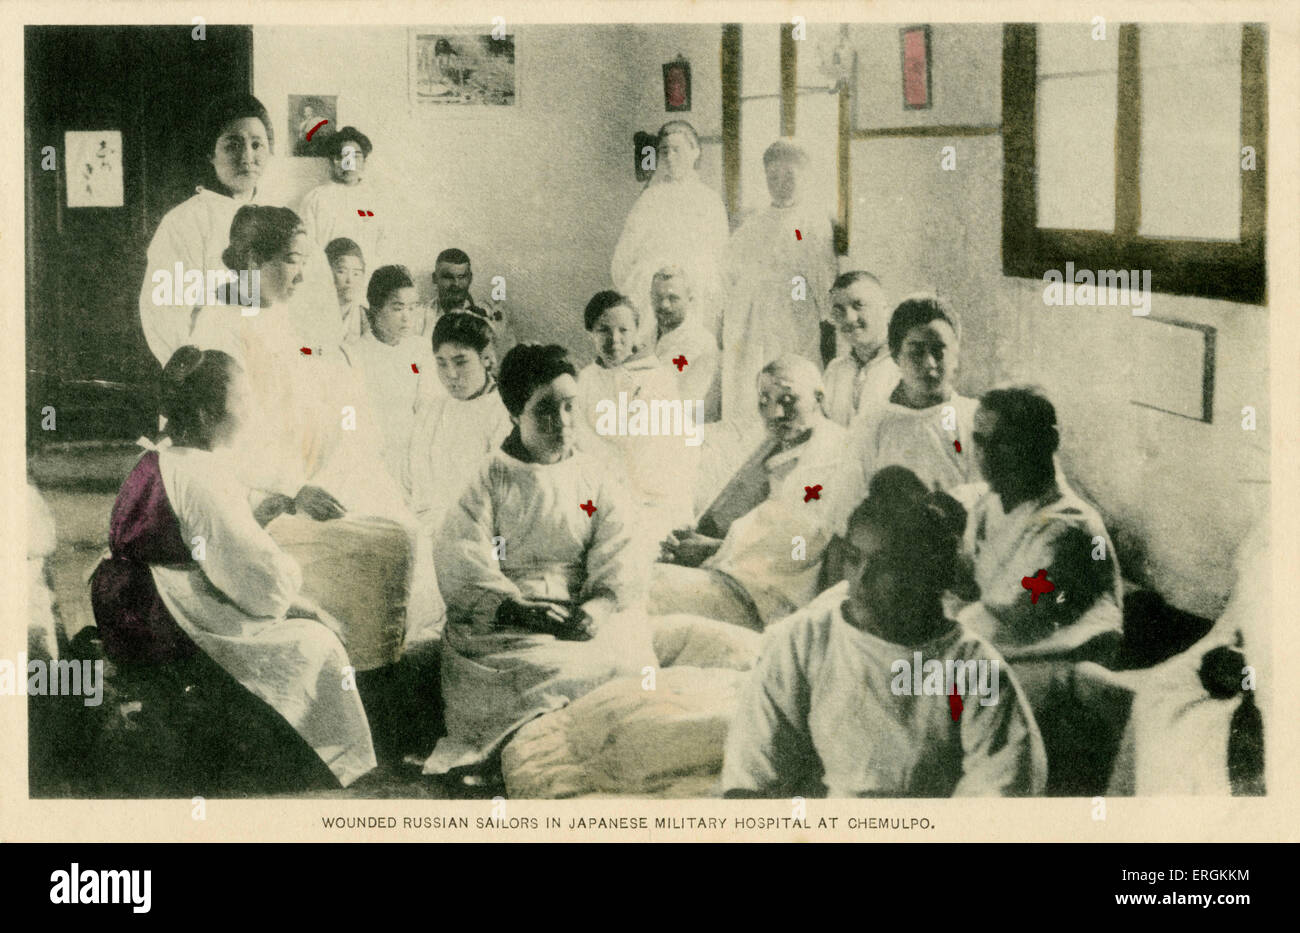 Russian sailors in a Korean military hospital at Chemulpo. The Battle of Chemulpo marked the first major Japanese victory in the Russo-Japanese war (1904-5). Caption reads: 'wounded russian sailors in Japanese Military hospital at Chemulpo'. Stock Photo